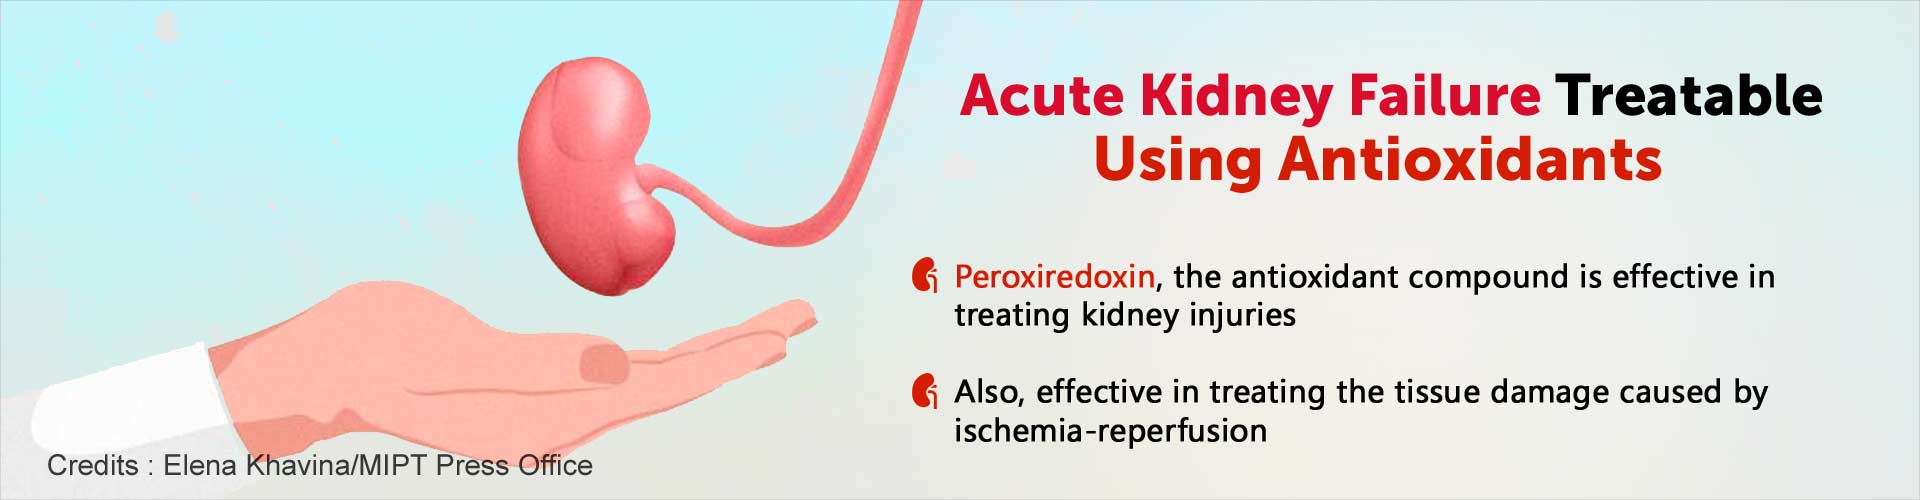 Acute kidney failure treatable using antioxidants. Peroxiredoxin, the antioxidant compound is effective in treating kidney injuries. Also, effective in treating the tissue damage caused by ischemia-reperfusion.